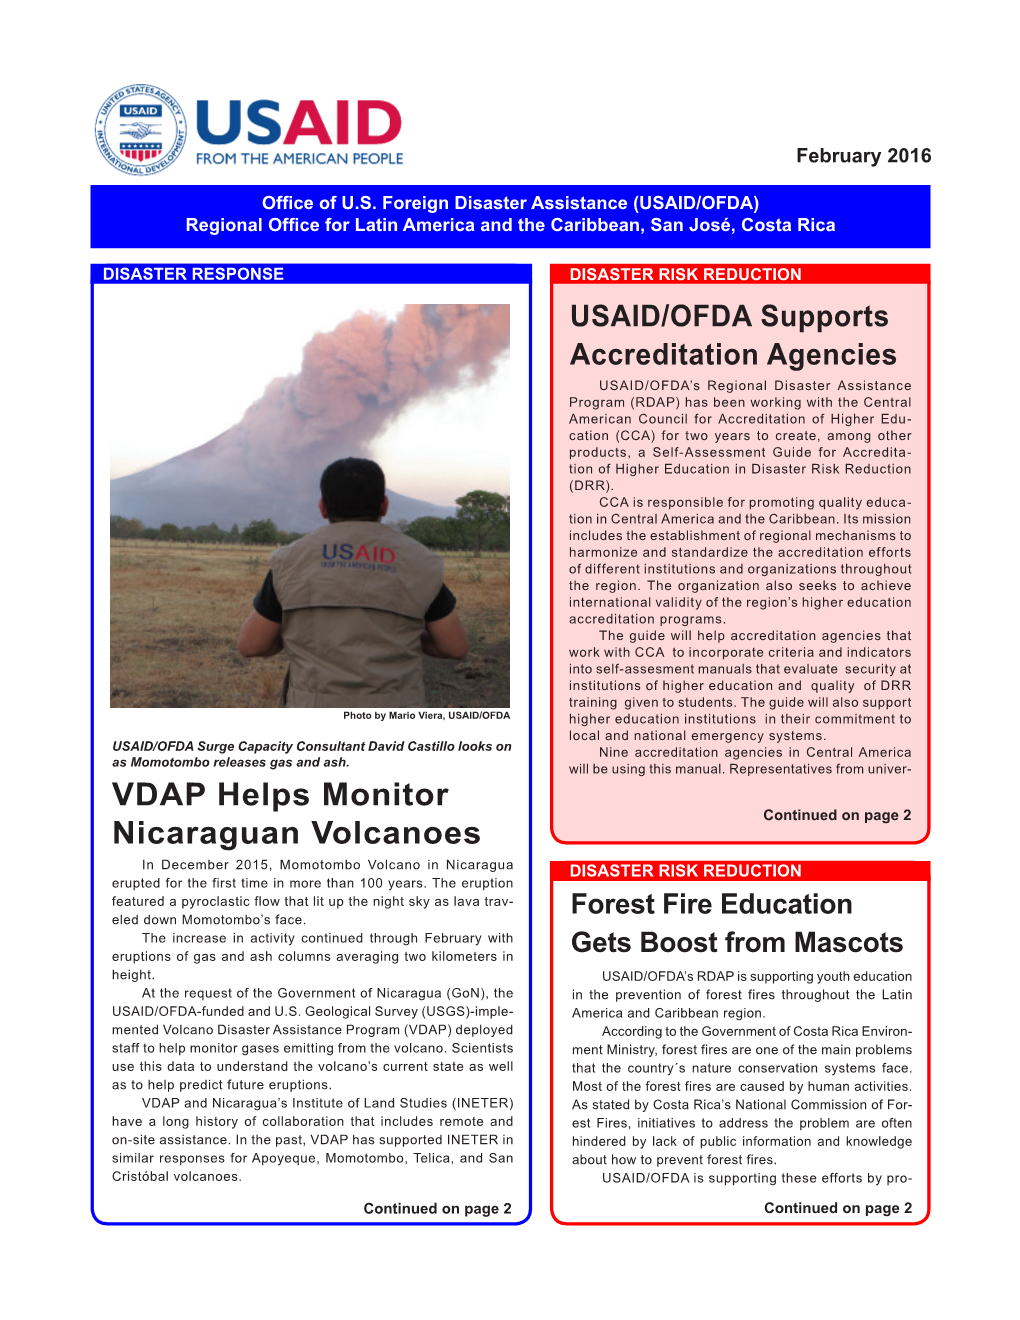 LAC Newsletter February 2016